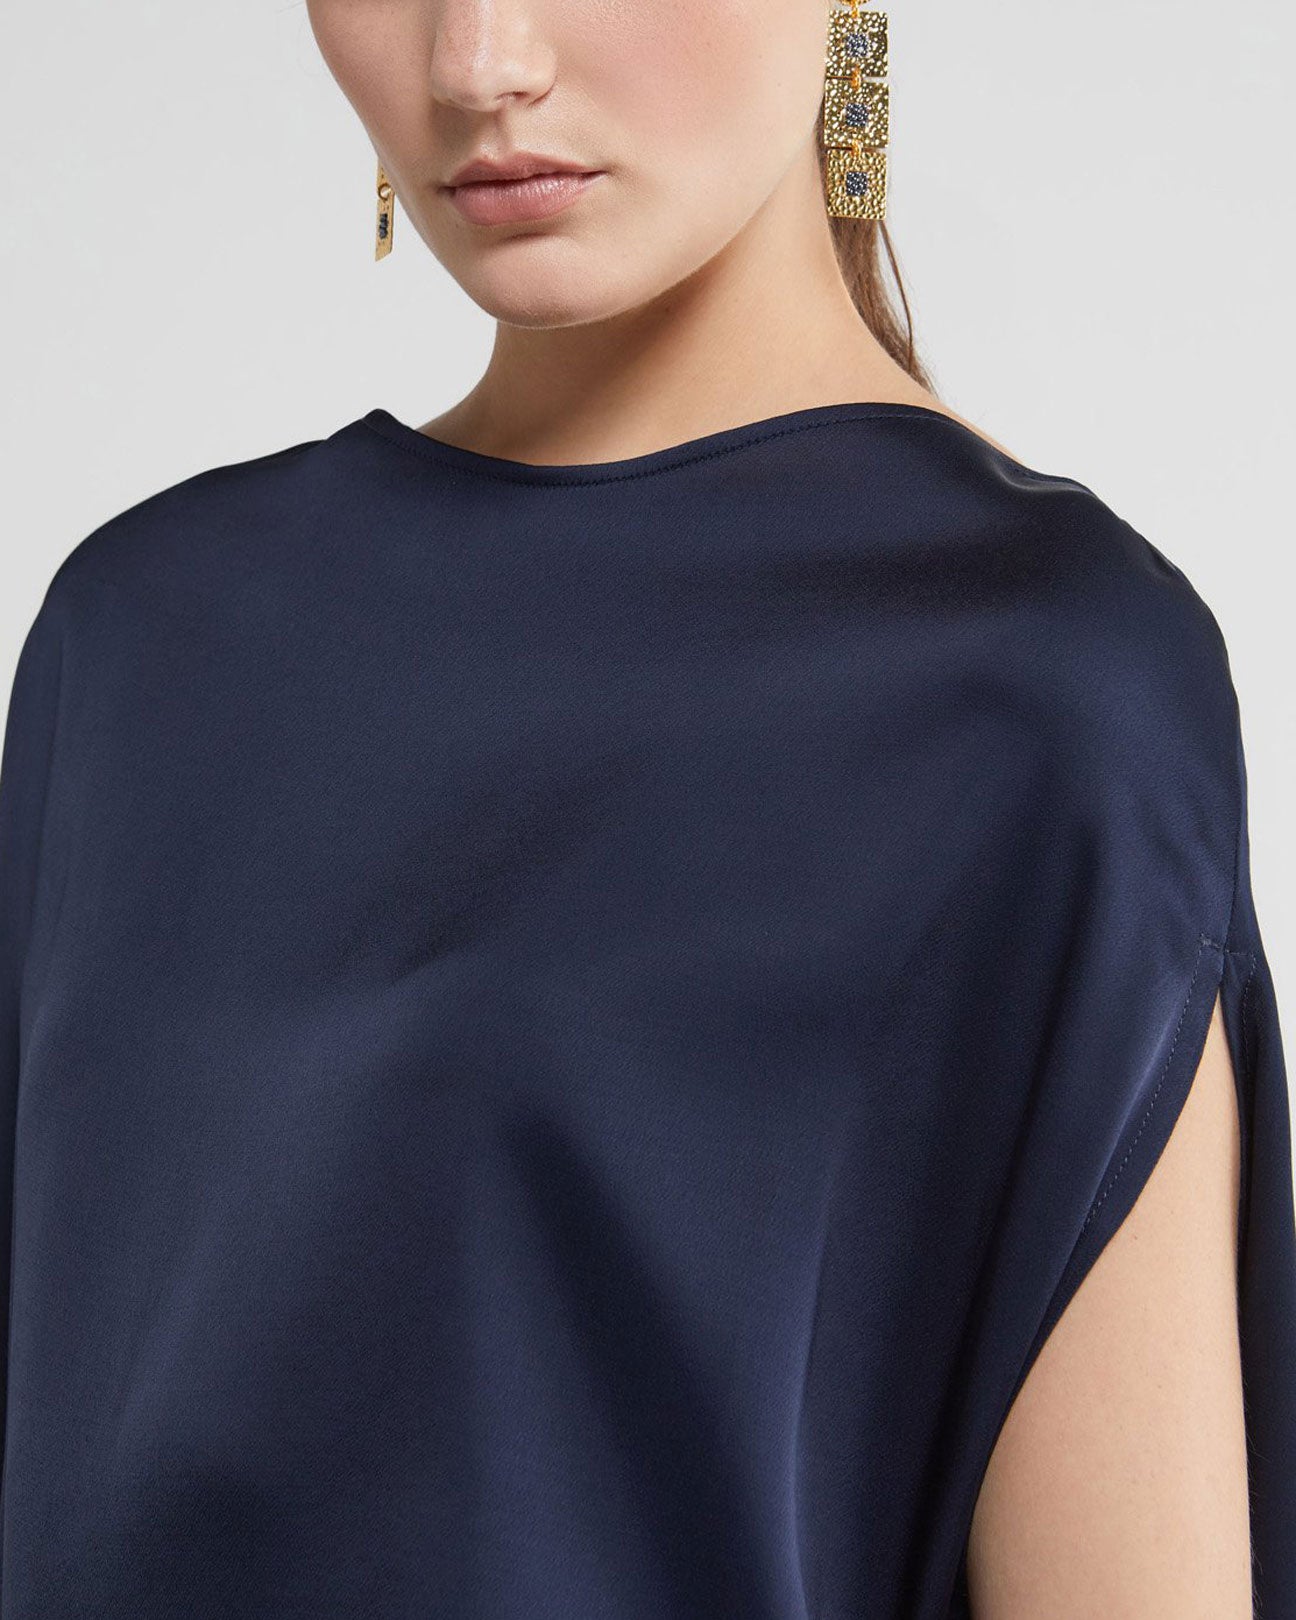 OTTOD'AME Round Cut Satin Blouse in Navy available at Lahn.shop